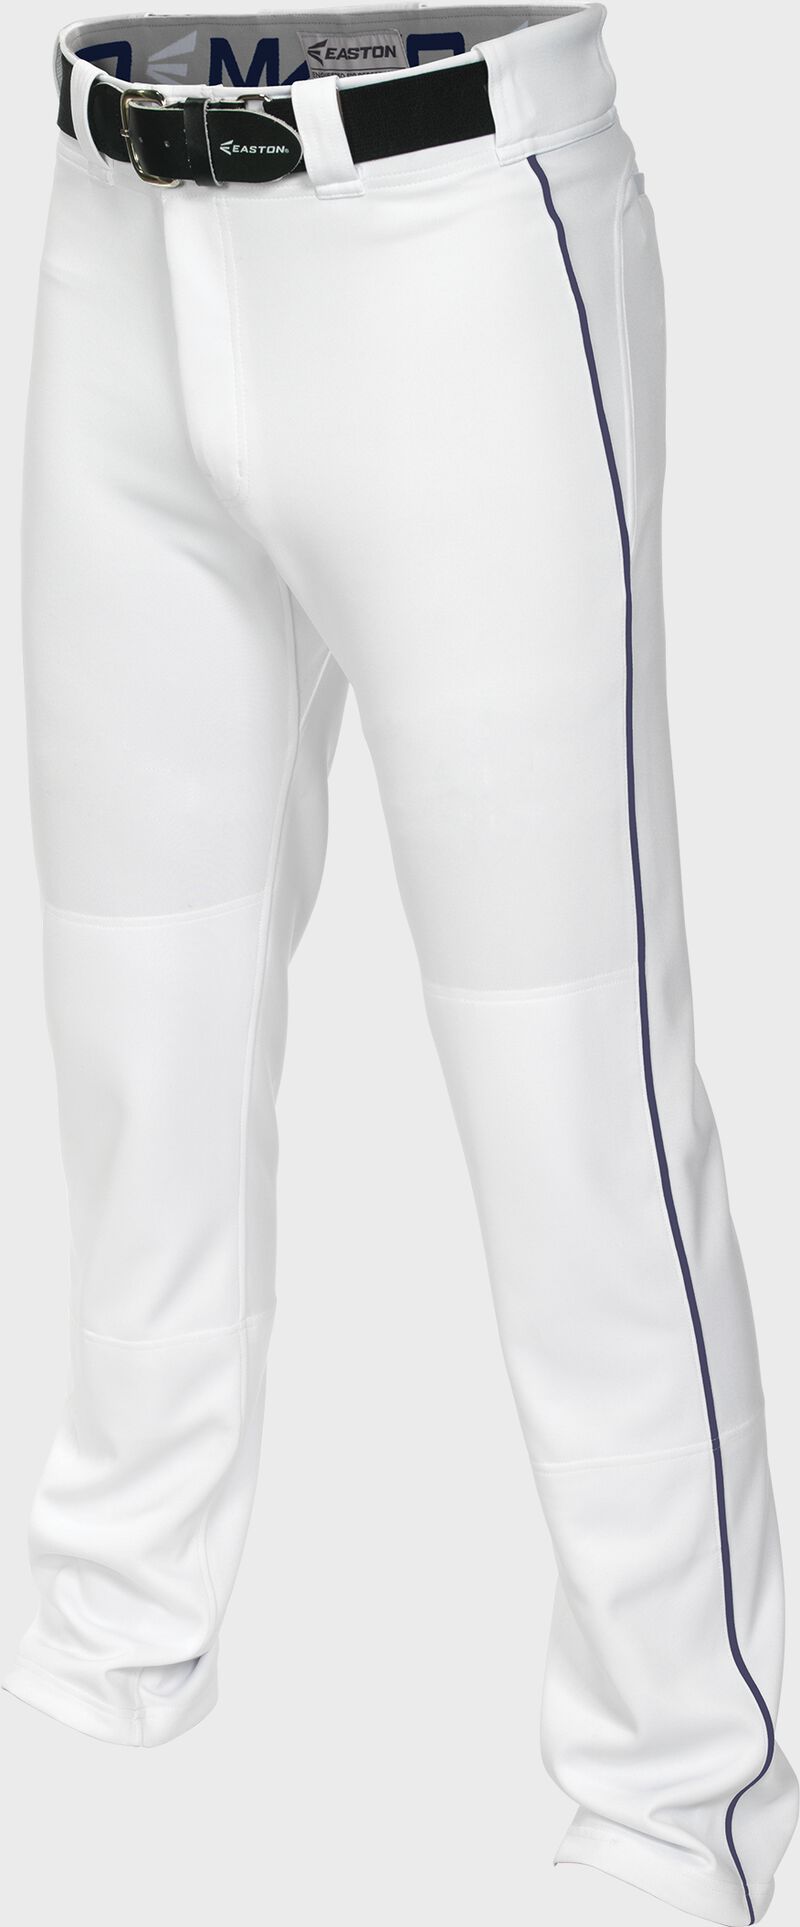 Mako 2 Pant Adult Piped WHITE/NAVY  XL image number null